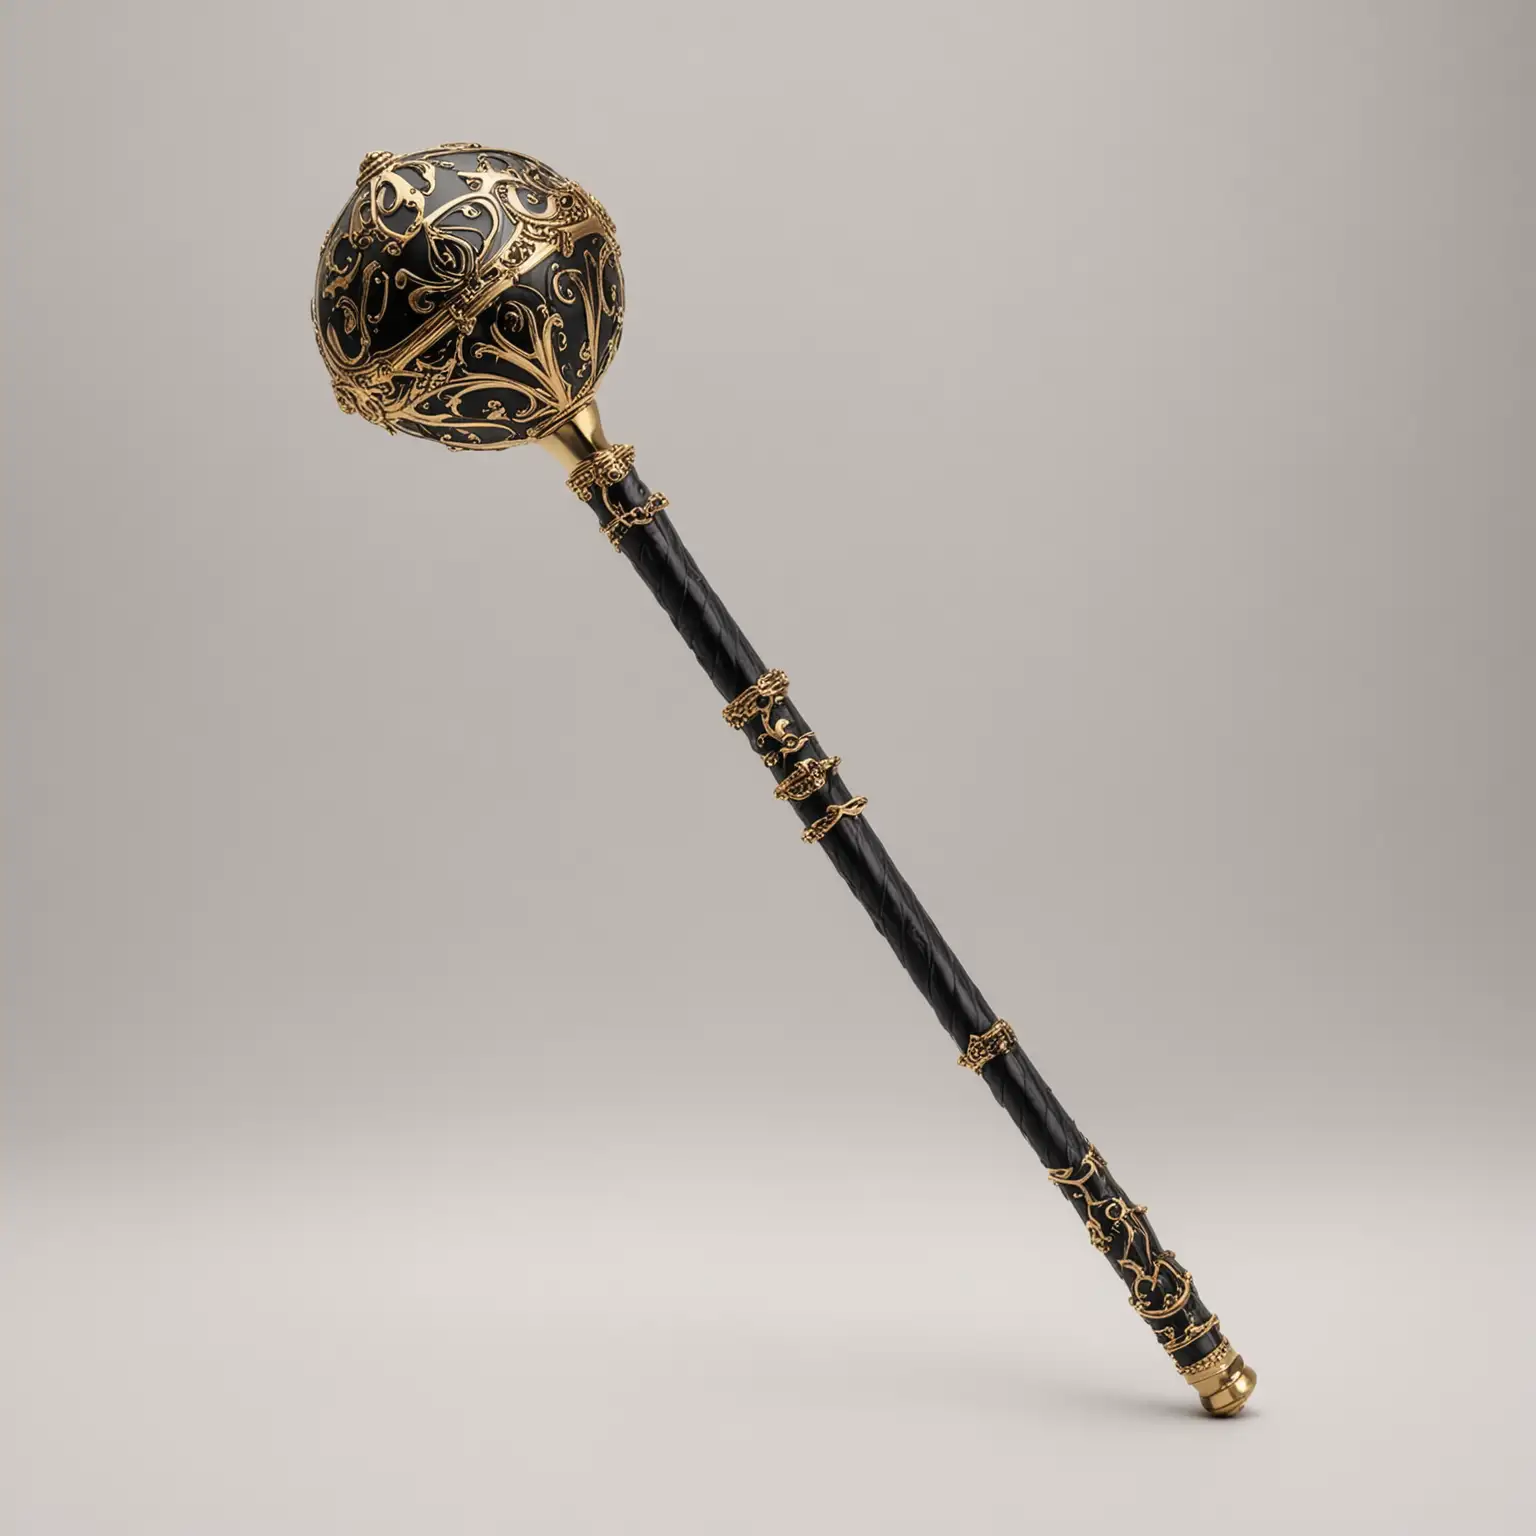 HighQuality-Black-and-Gold-Combatable-Mace-on-White-Background